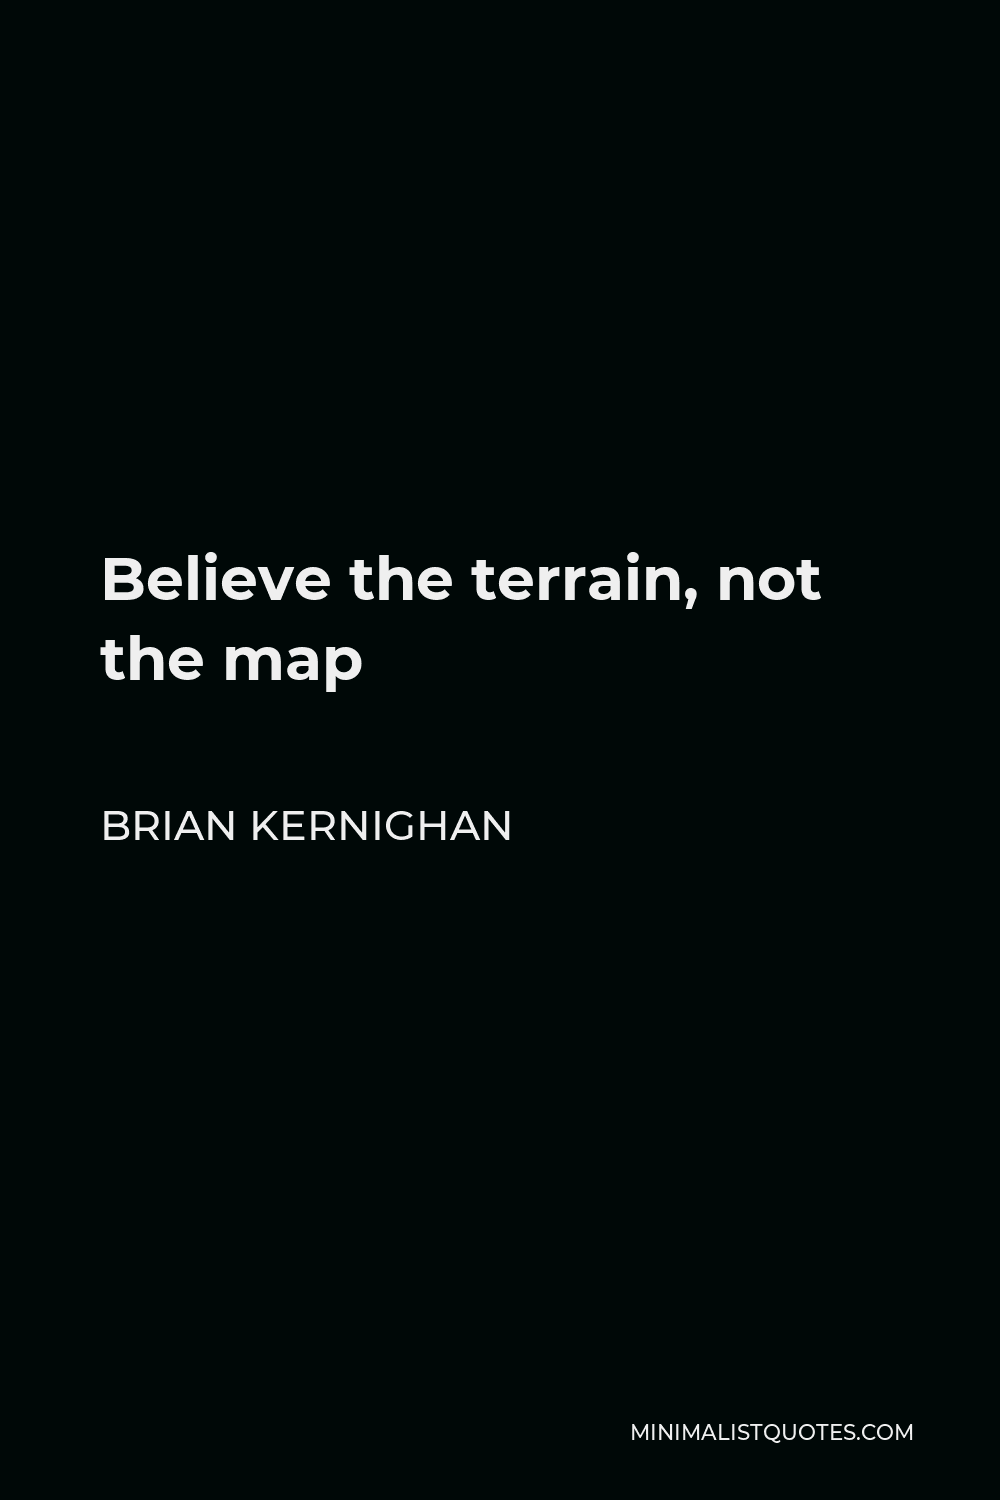 Brian Kernighan Quote - Believe the terrain, not the map